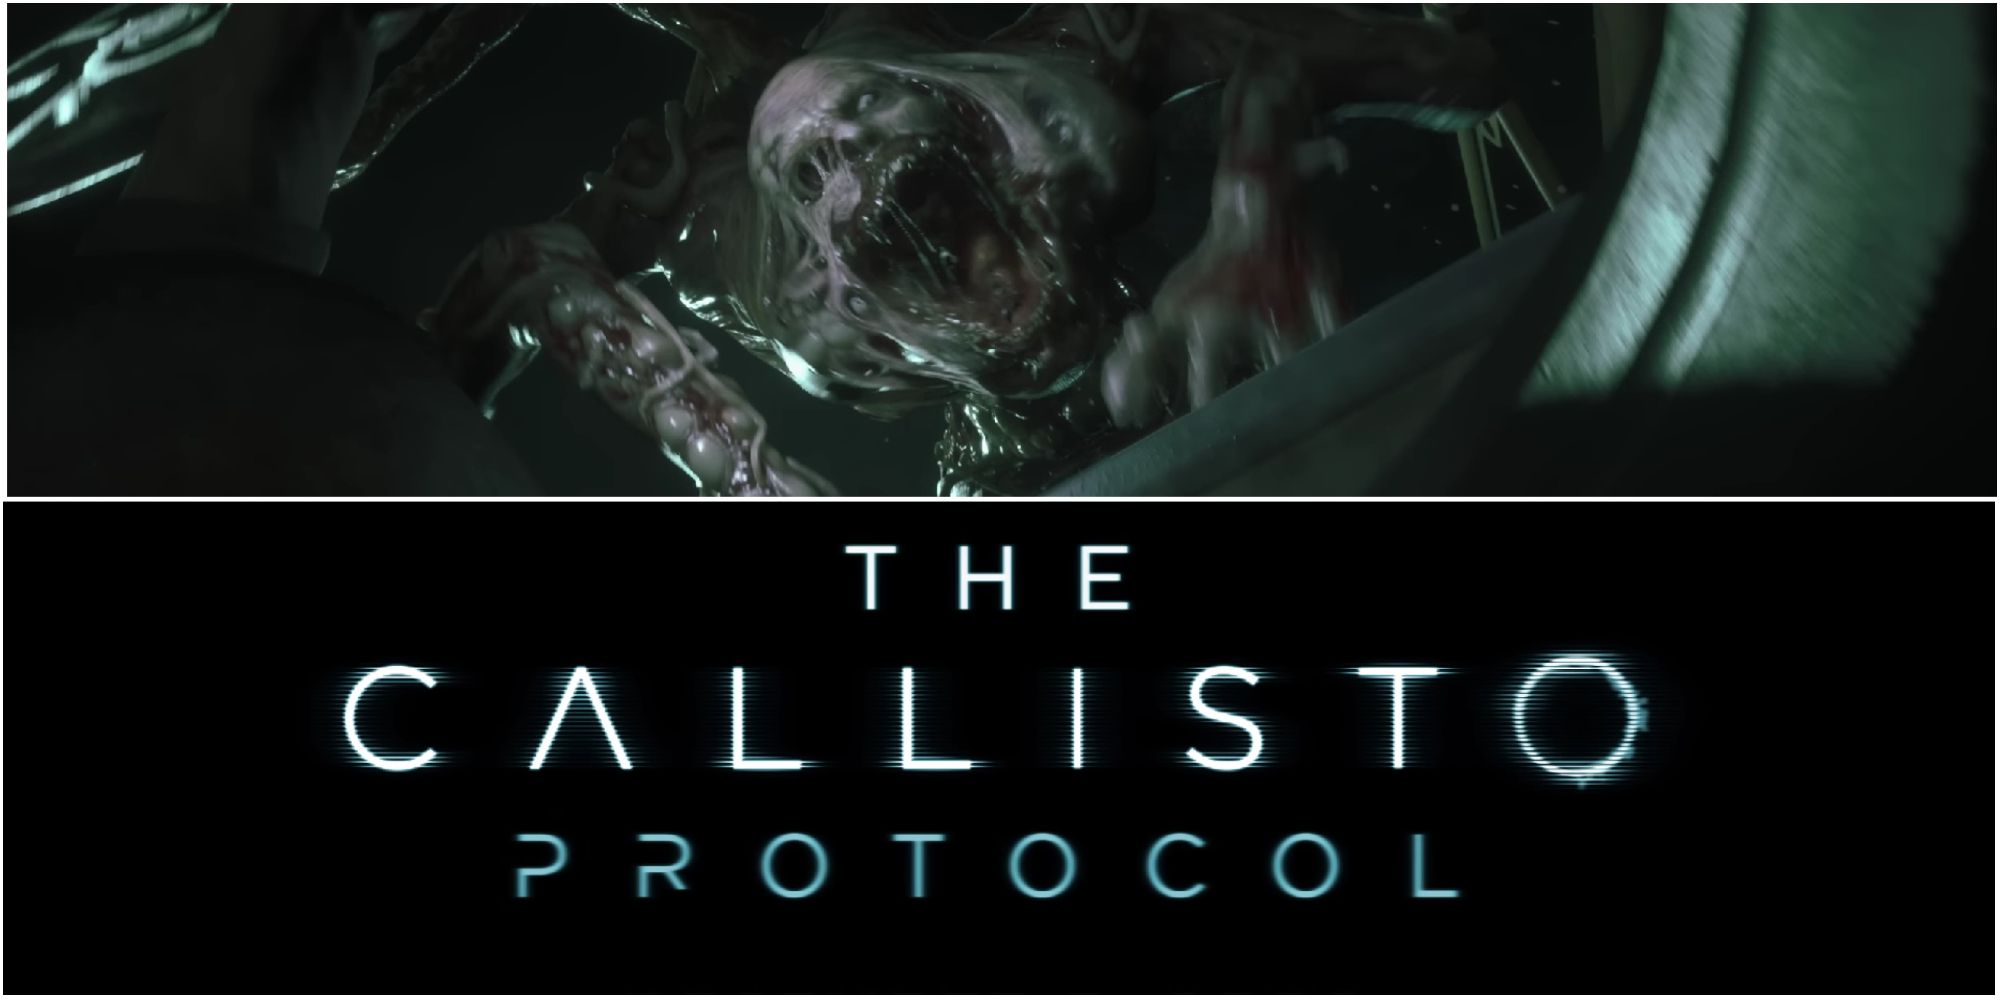 Screenshot split image of the scary creature and title screen from The Callisto Protocol trailer.